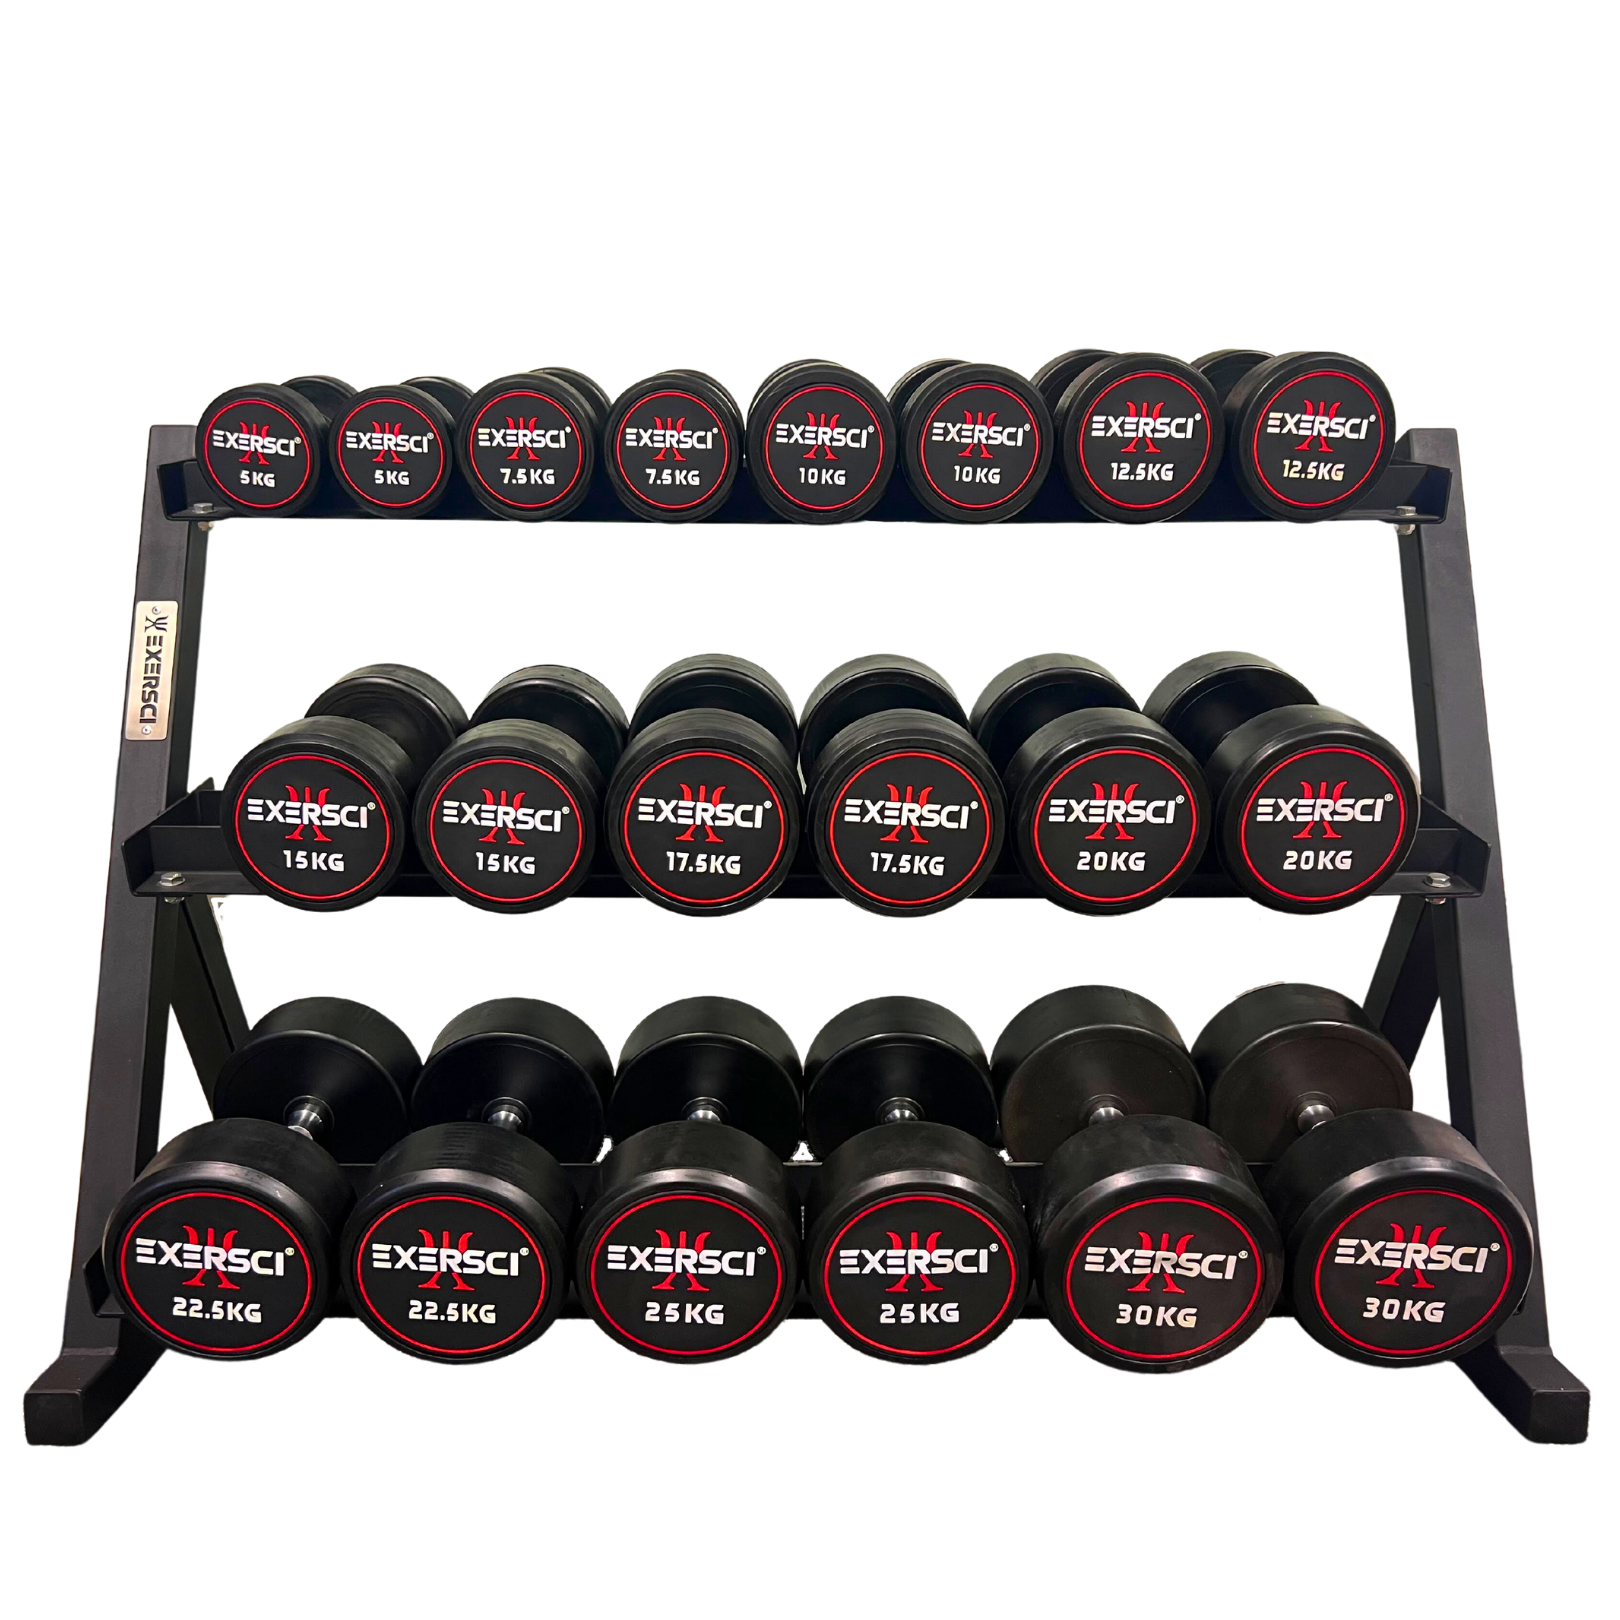 Exersci® 5kg-30kg Round Rubber Dumbbell Bundle with 3-Tier Rack